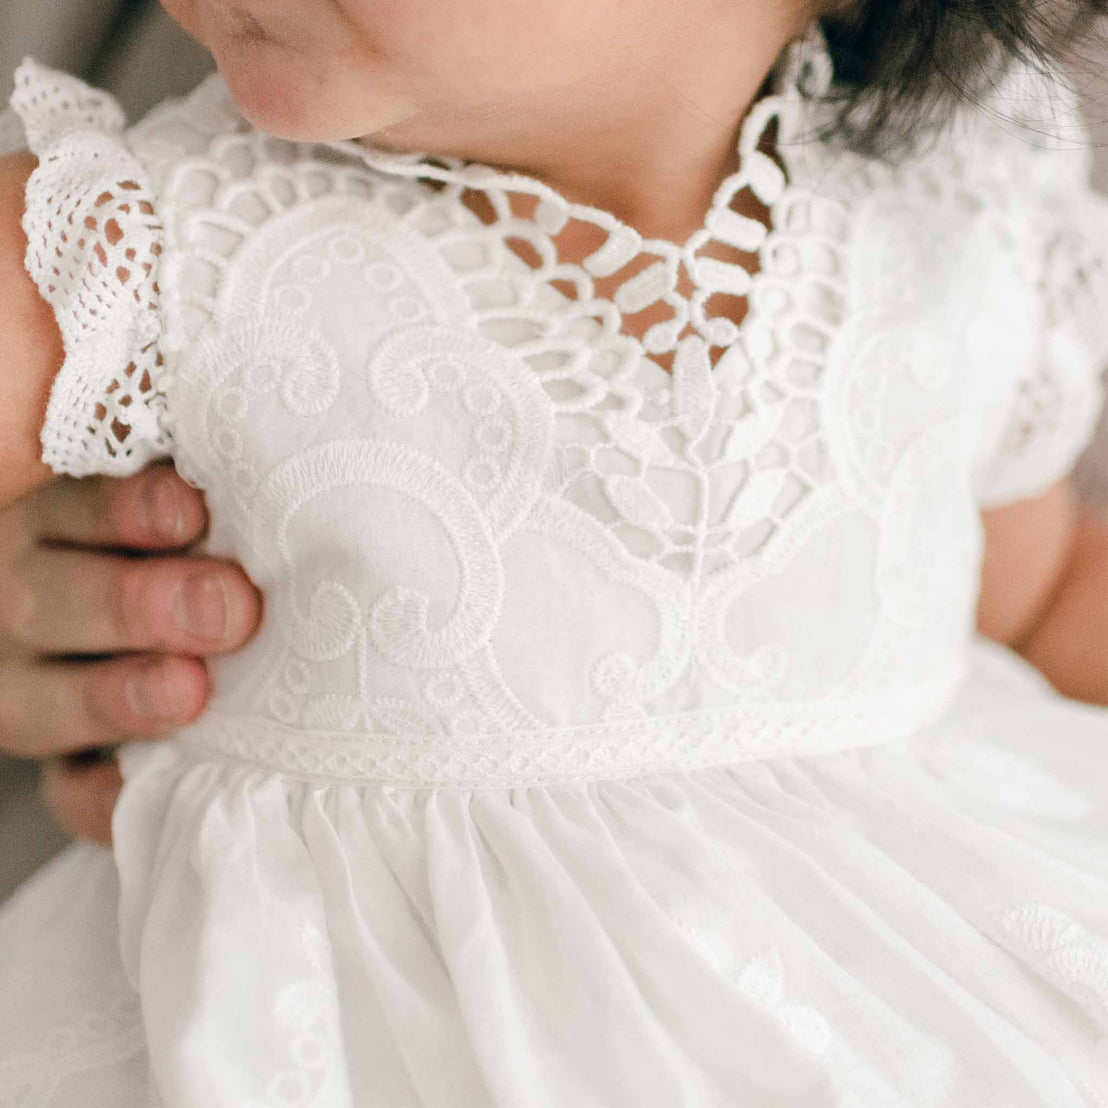 Detail of the top bodice of a christening romper dress worn by a baby girl